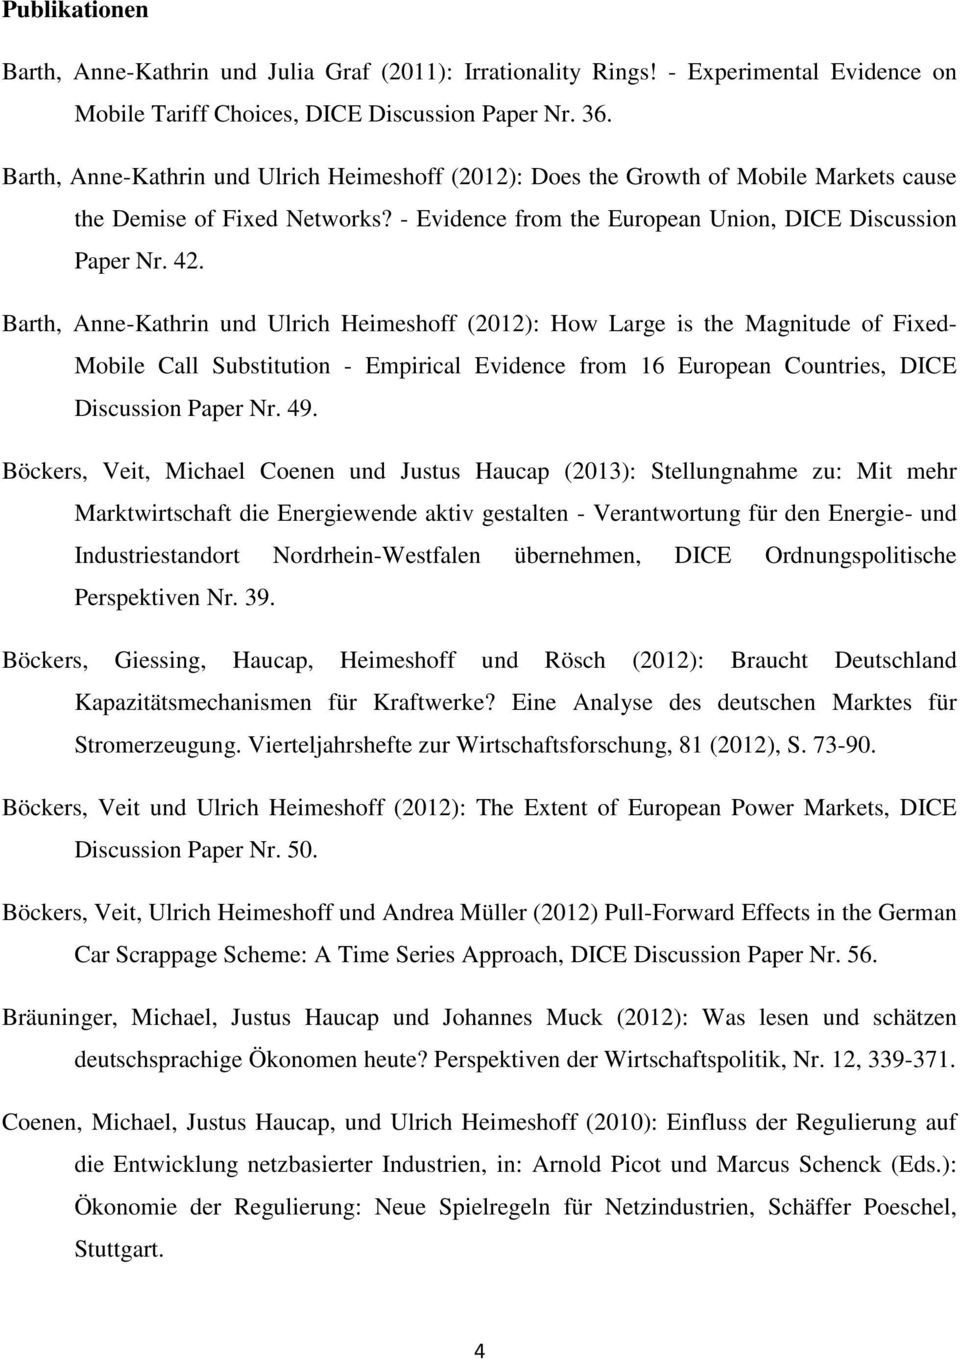 Barth, Anne-Kathrin und Ulrich Heimeshoff (2012): How Large is the Magnitude of Fixed- Mobile Call Substitution - Empirical Evidence from 16 European Countries, DICE Discussion Paper Nr. 49.